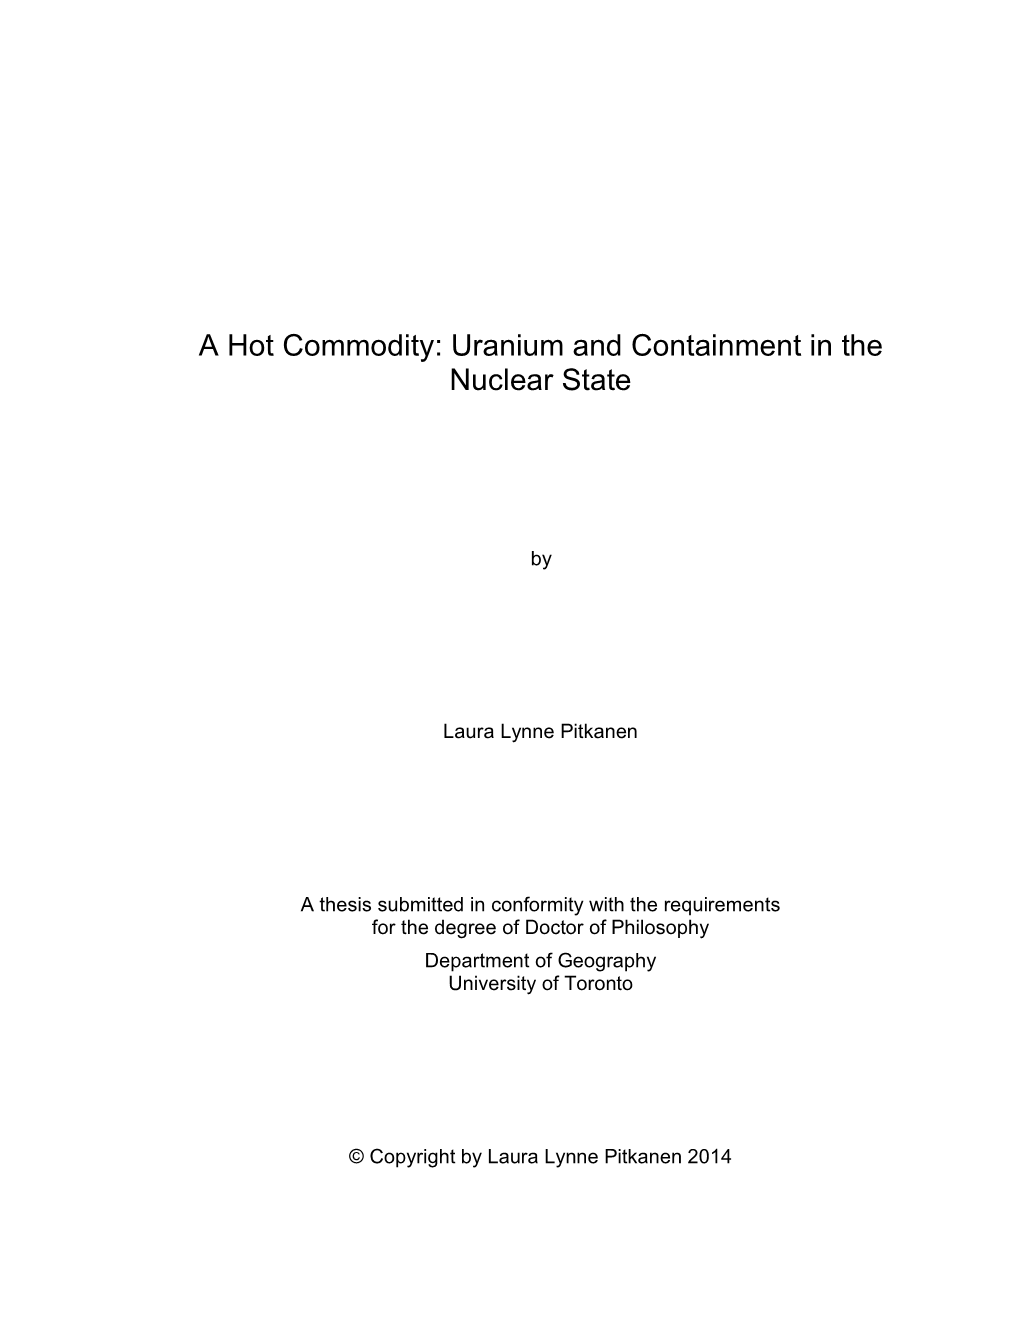 Uranium and Containment in the Nuclear State